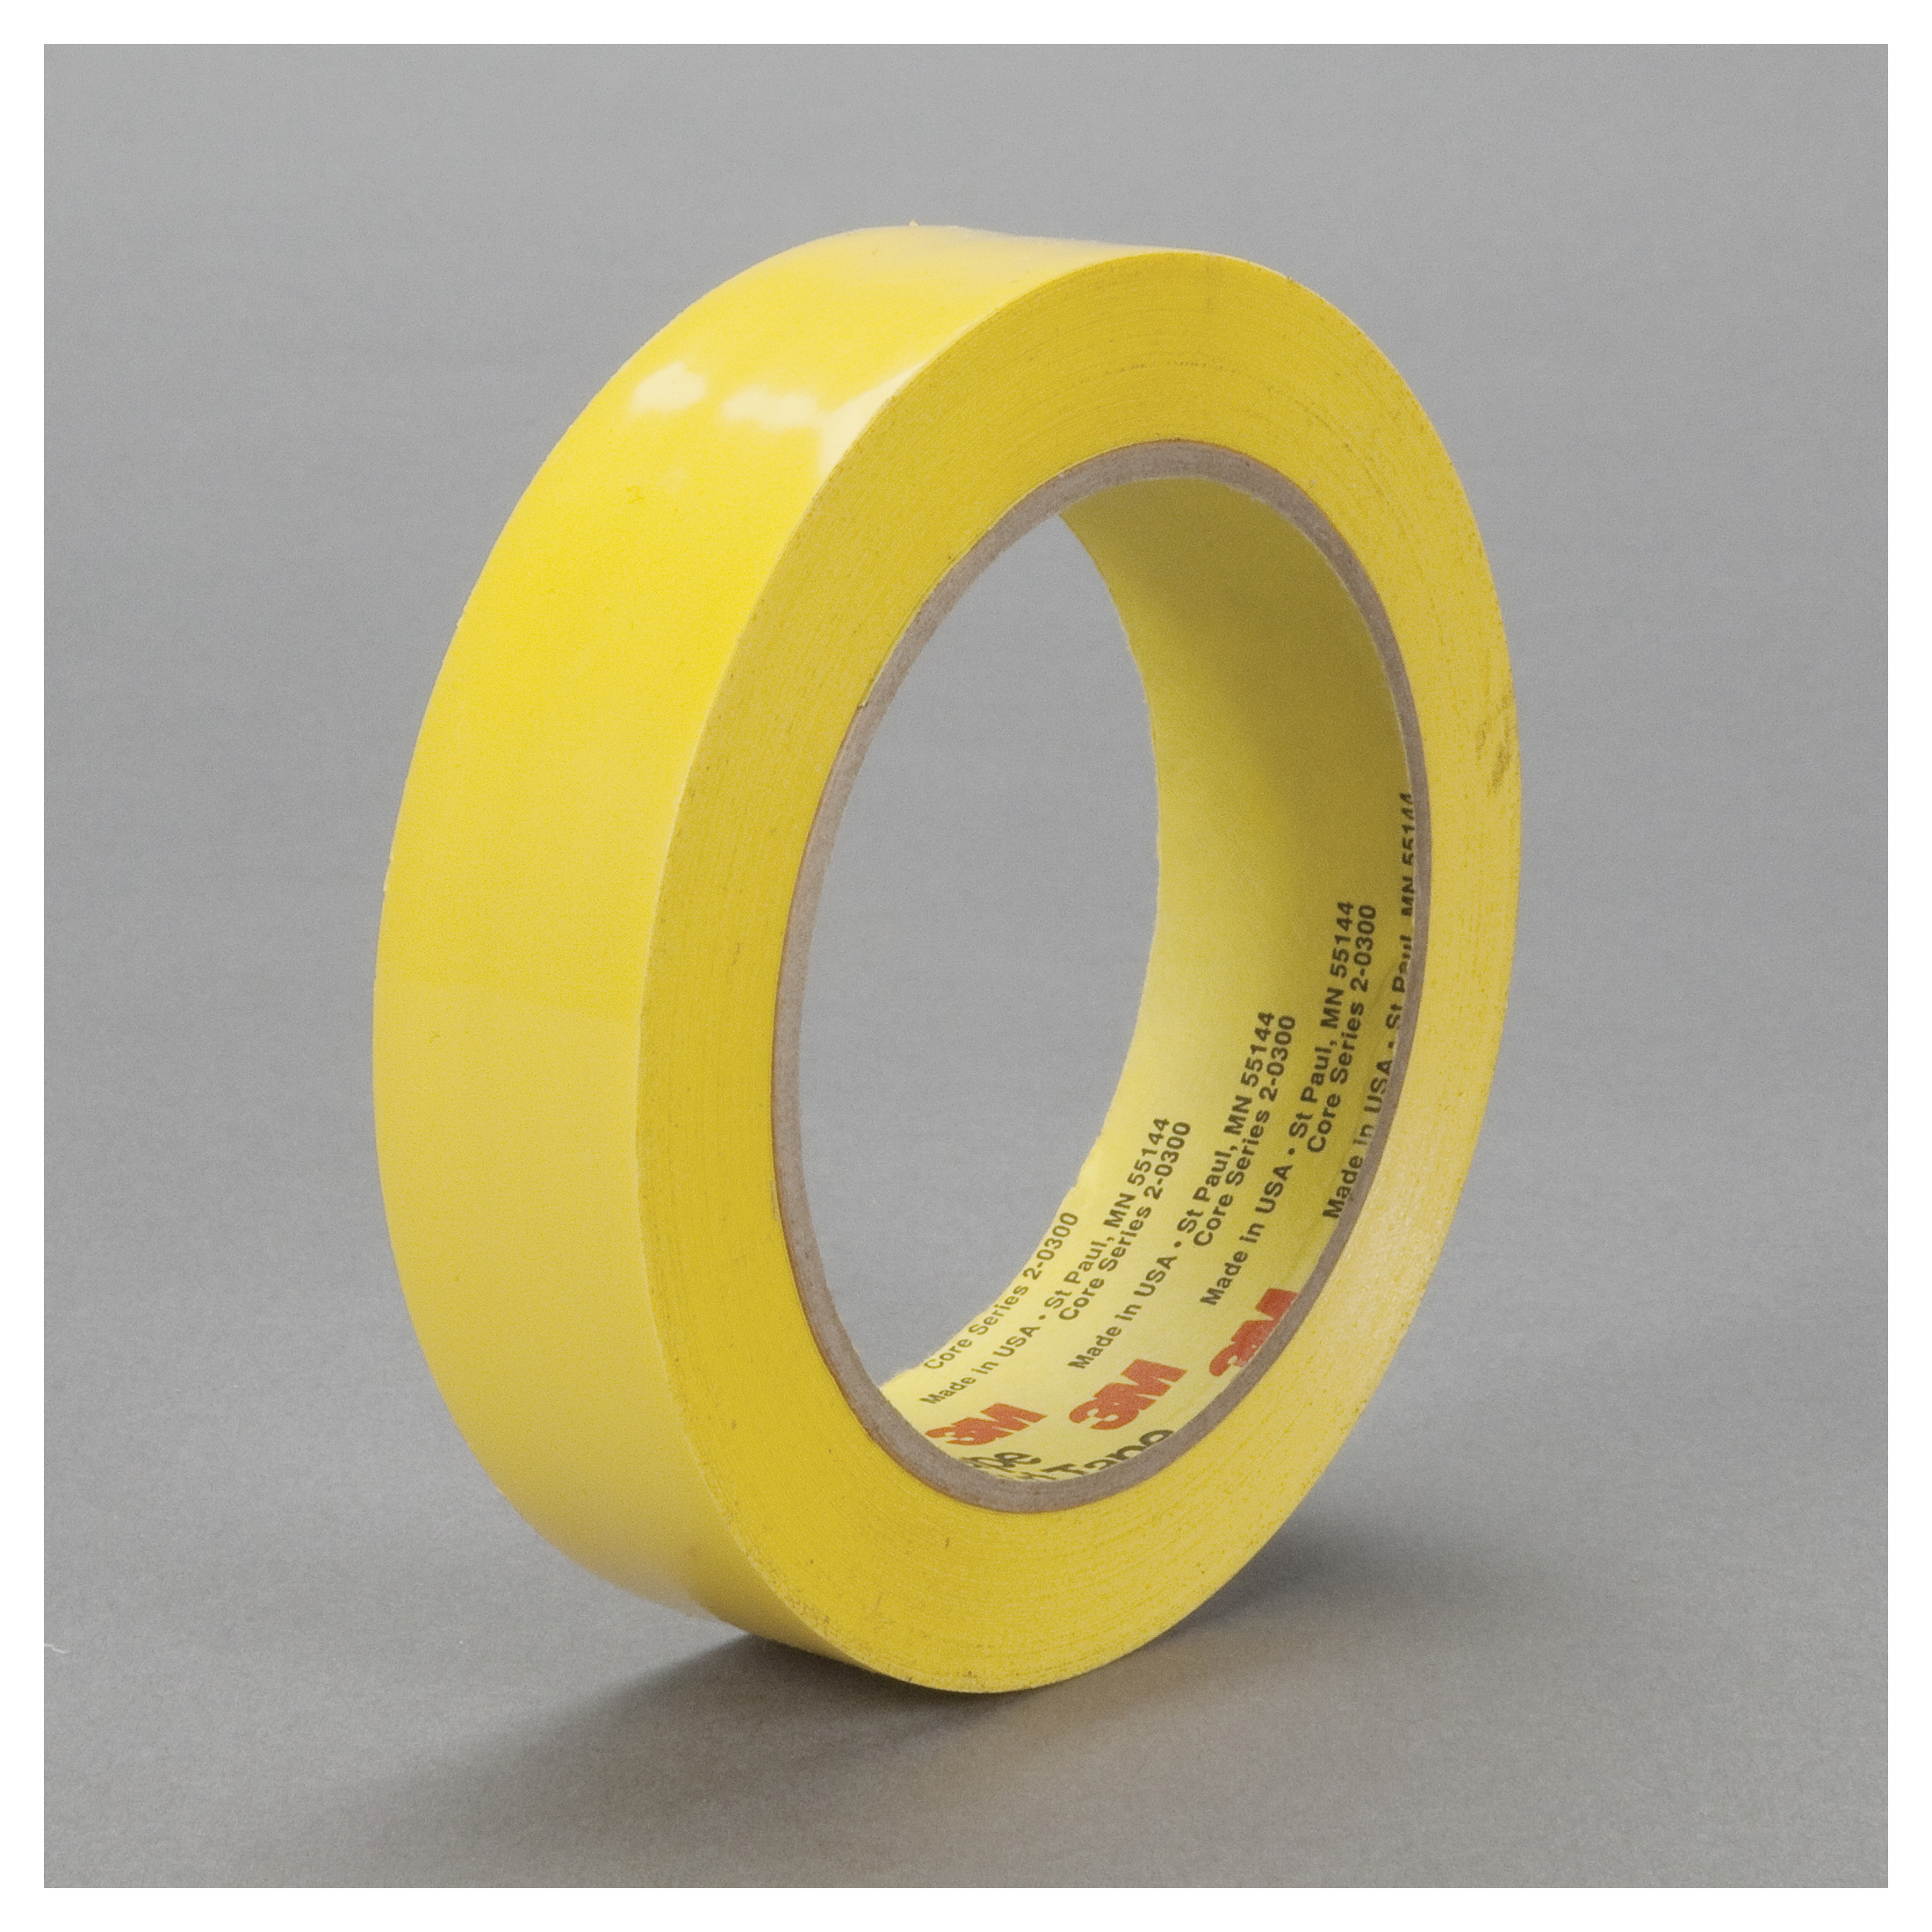 3M™ 021200-04011 Chemical-Resistant General Purpose UV-Resistant Masking Tape, 36 yd L x 1 in W, 5 mil THK, Rubber Adhesive, Polyethylene Backing